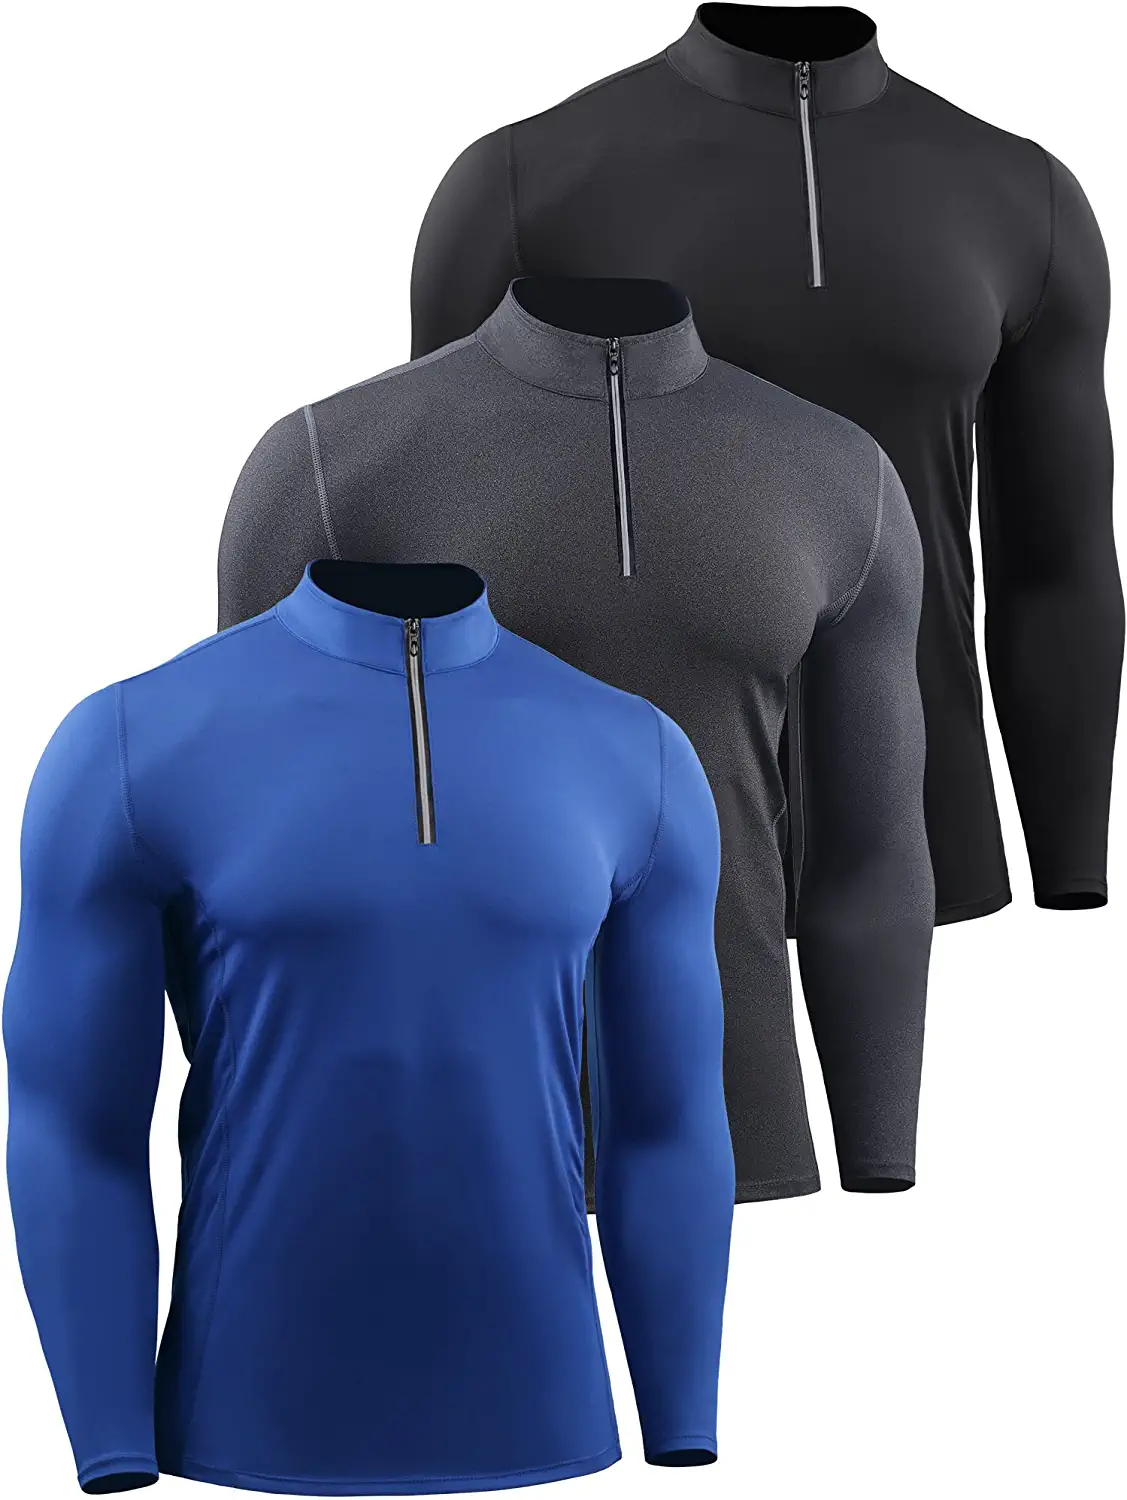 NELEUS Men's 3 Pack Dry Fit Long Sleeve Compression Shirts Workout Running  Shirt